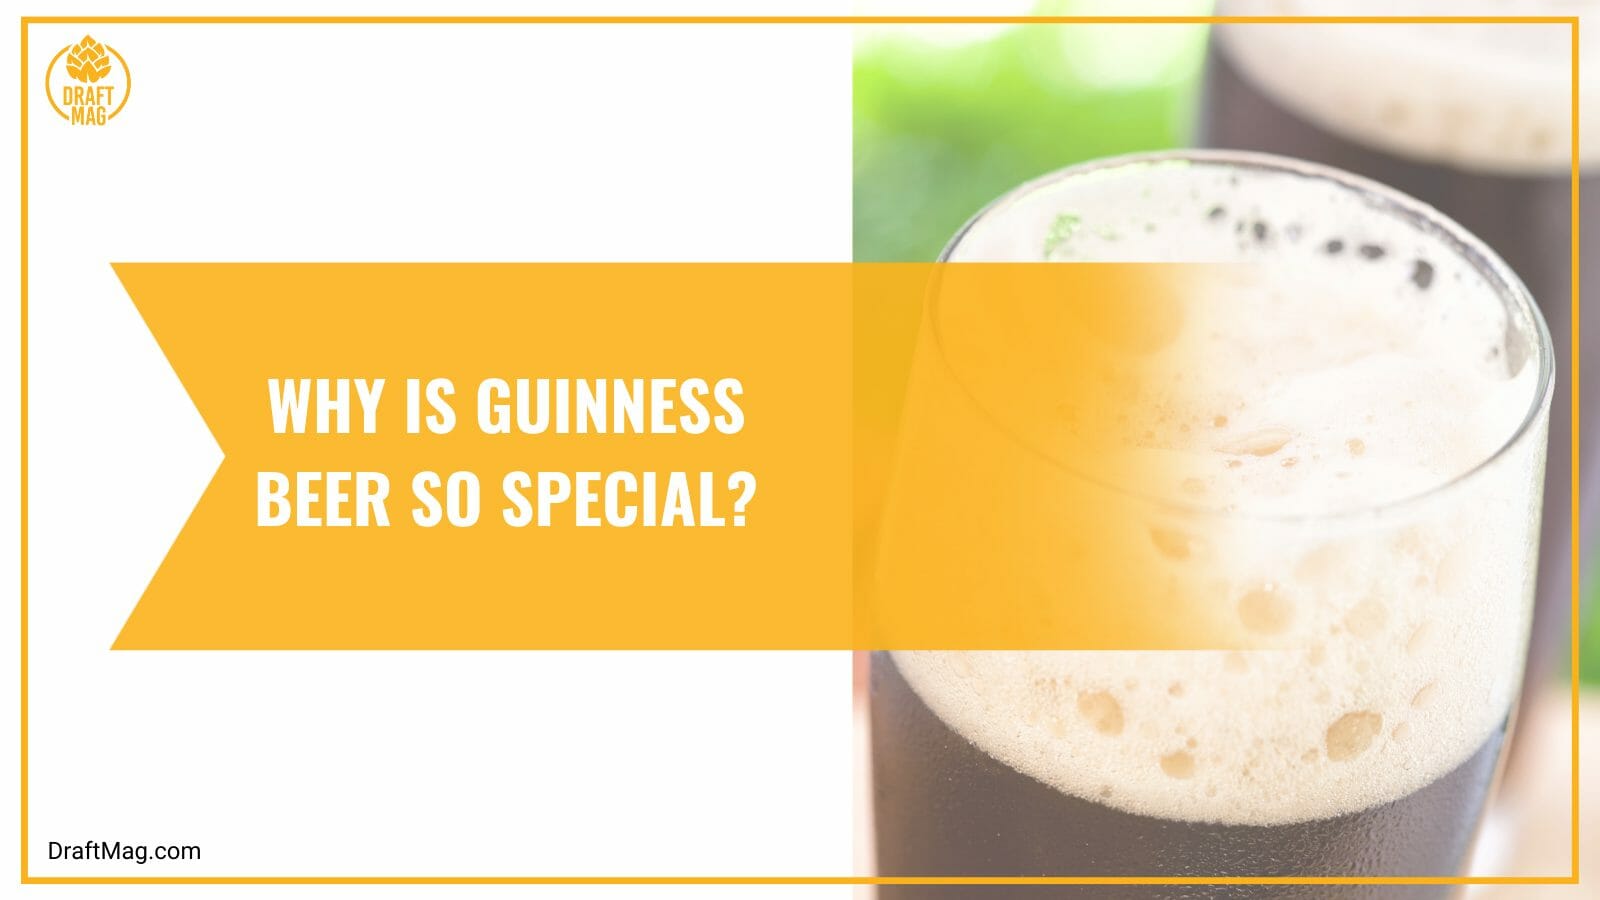 Why is guinness beer special